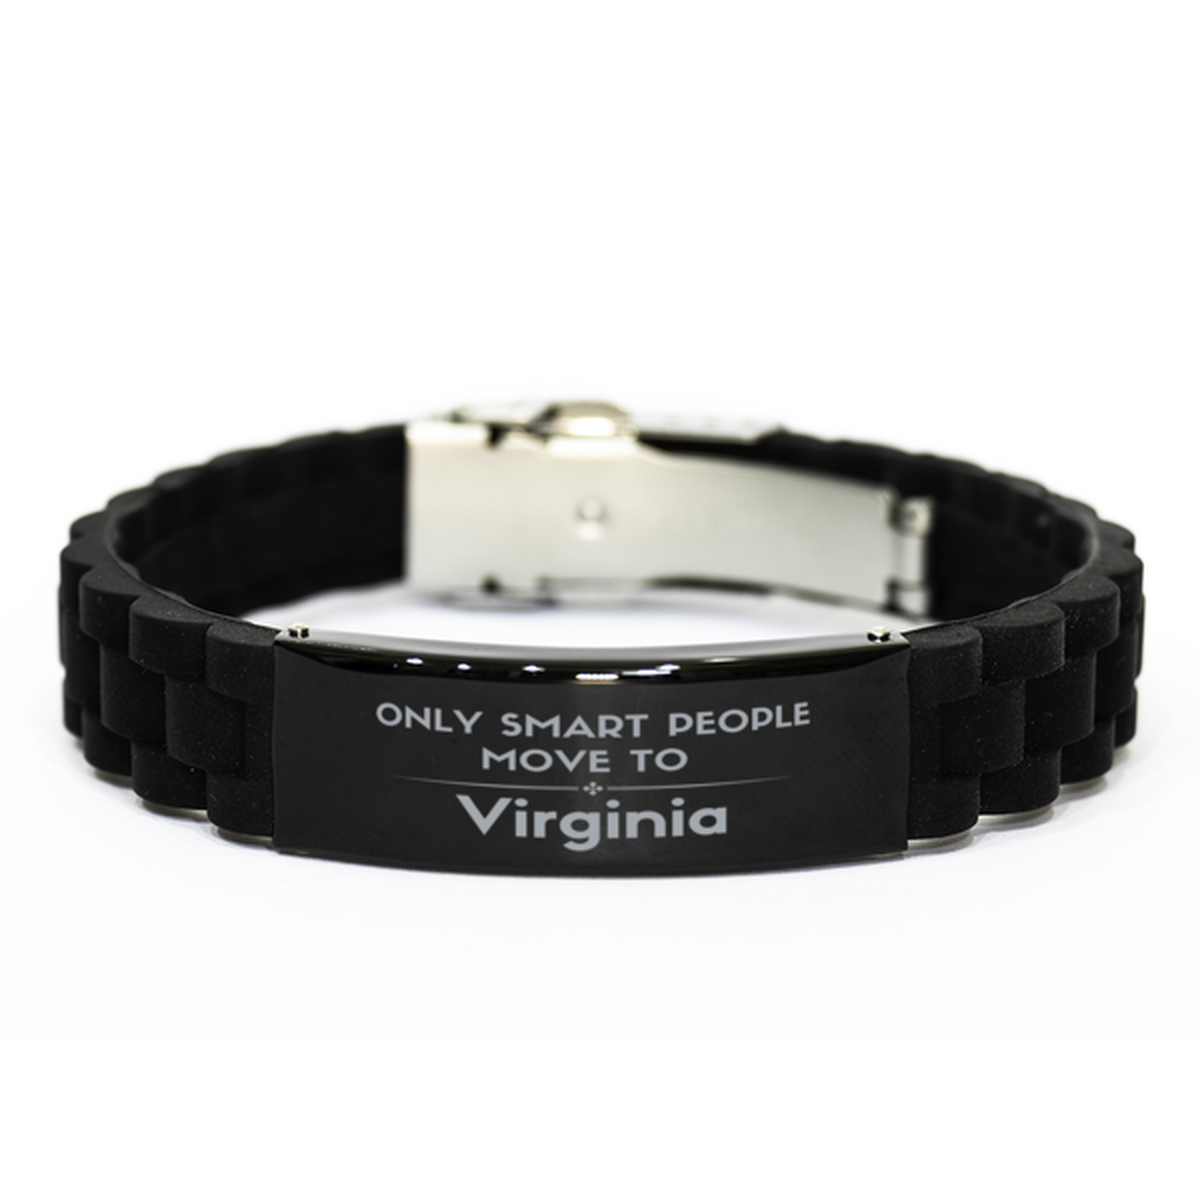 Only smart people move to Virginia Black Glidelock Clasp Bracelet, Gag Gifts For Virginia, Move to Virginia Gifts for Friends Coworker Funny Saying Quote